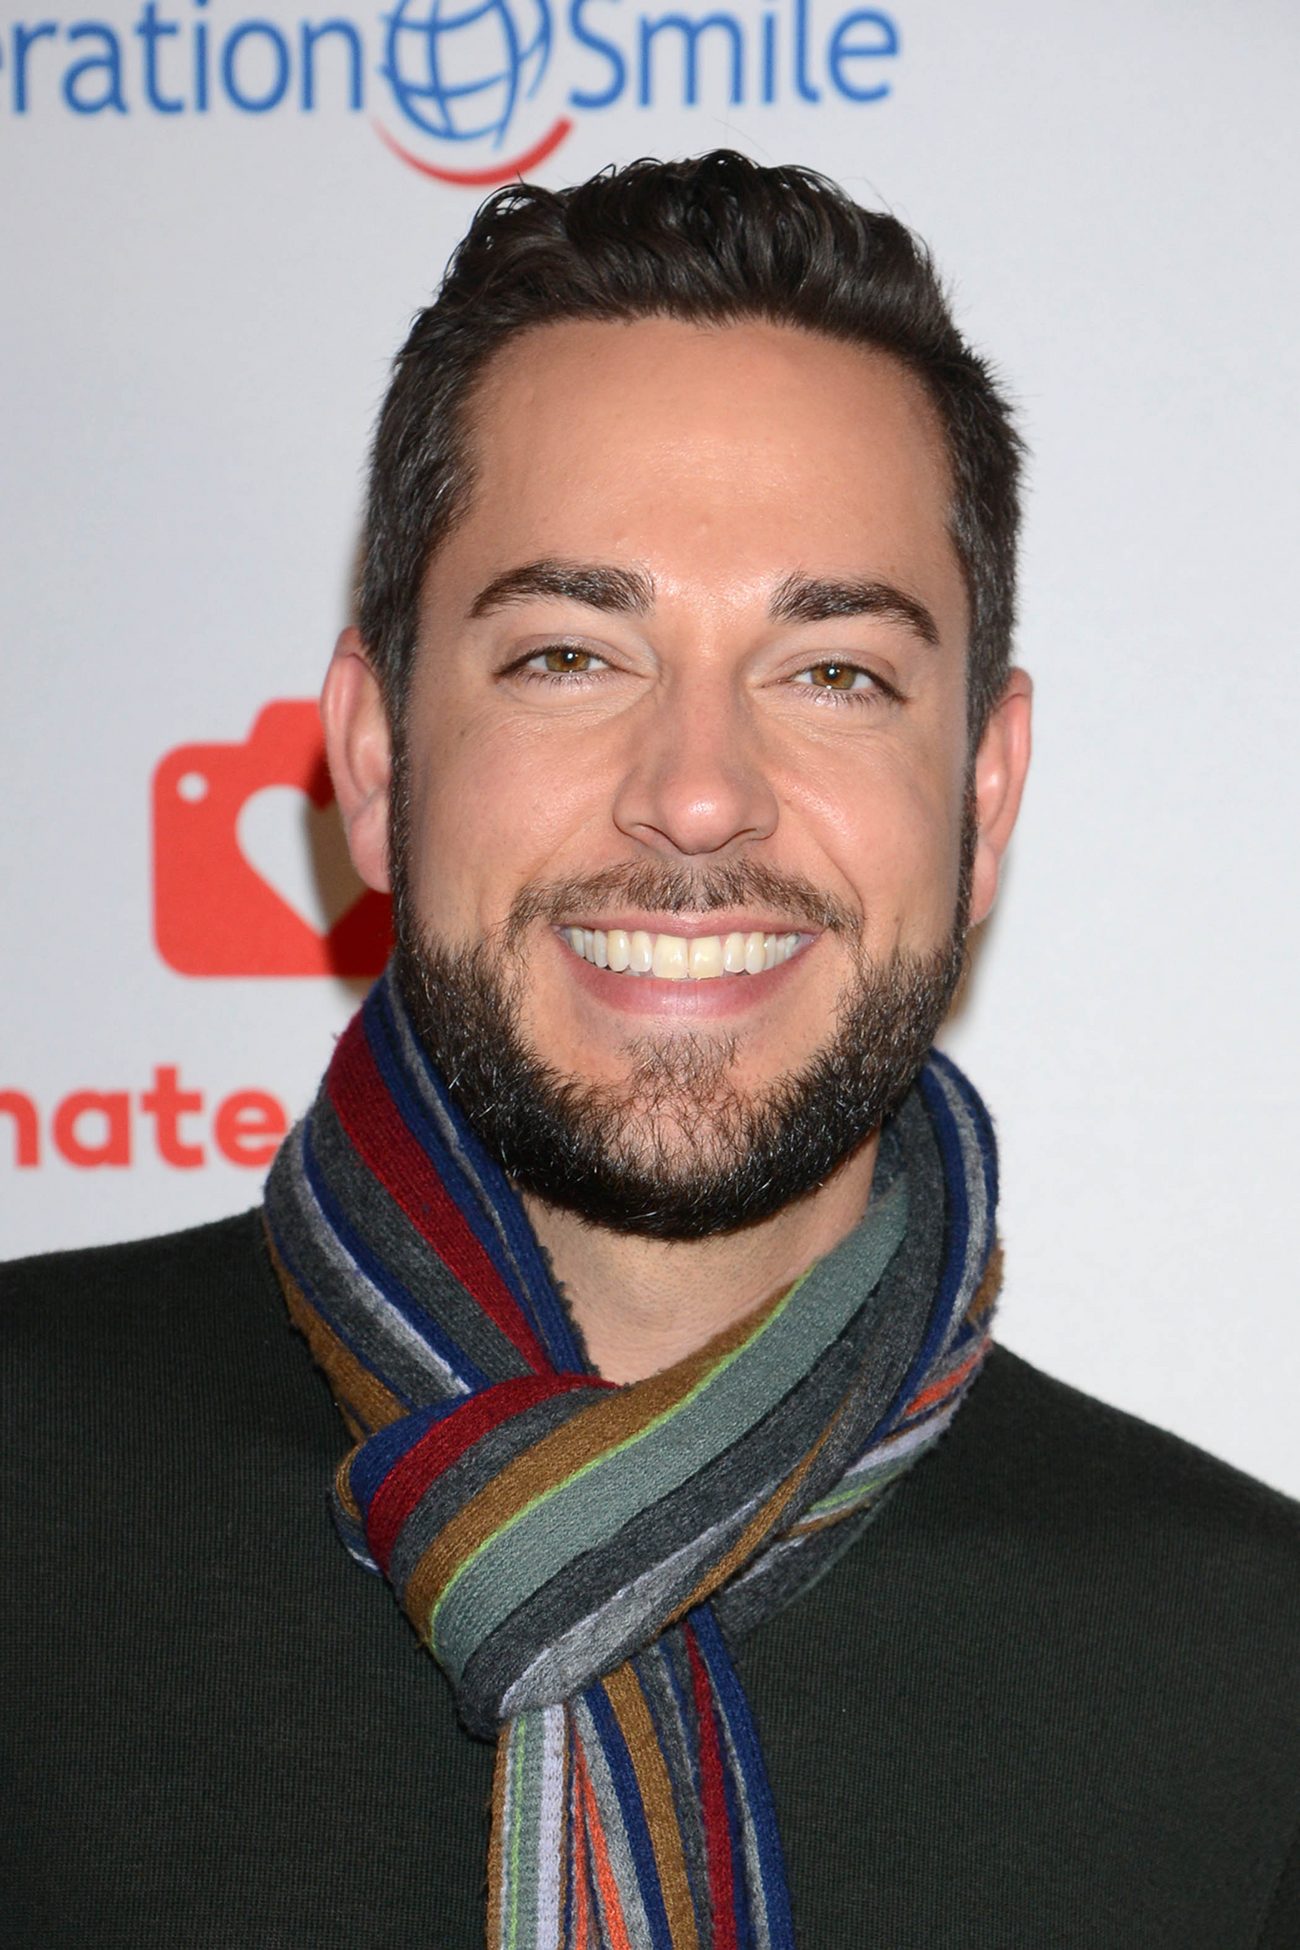 Zachary Levi Teams Up With Donate A Photo To Kick Off Season Of Giving